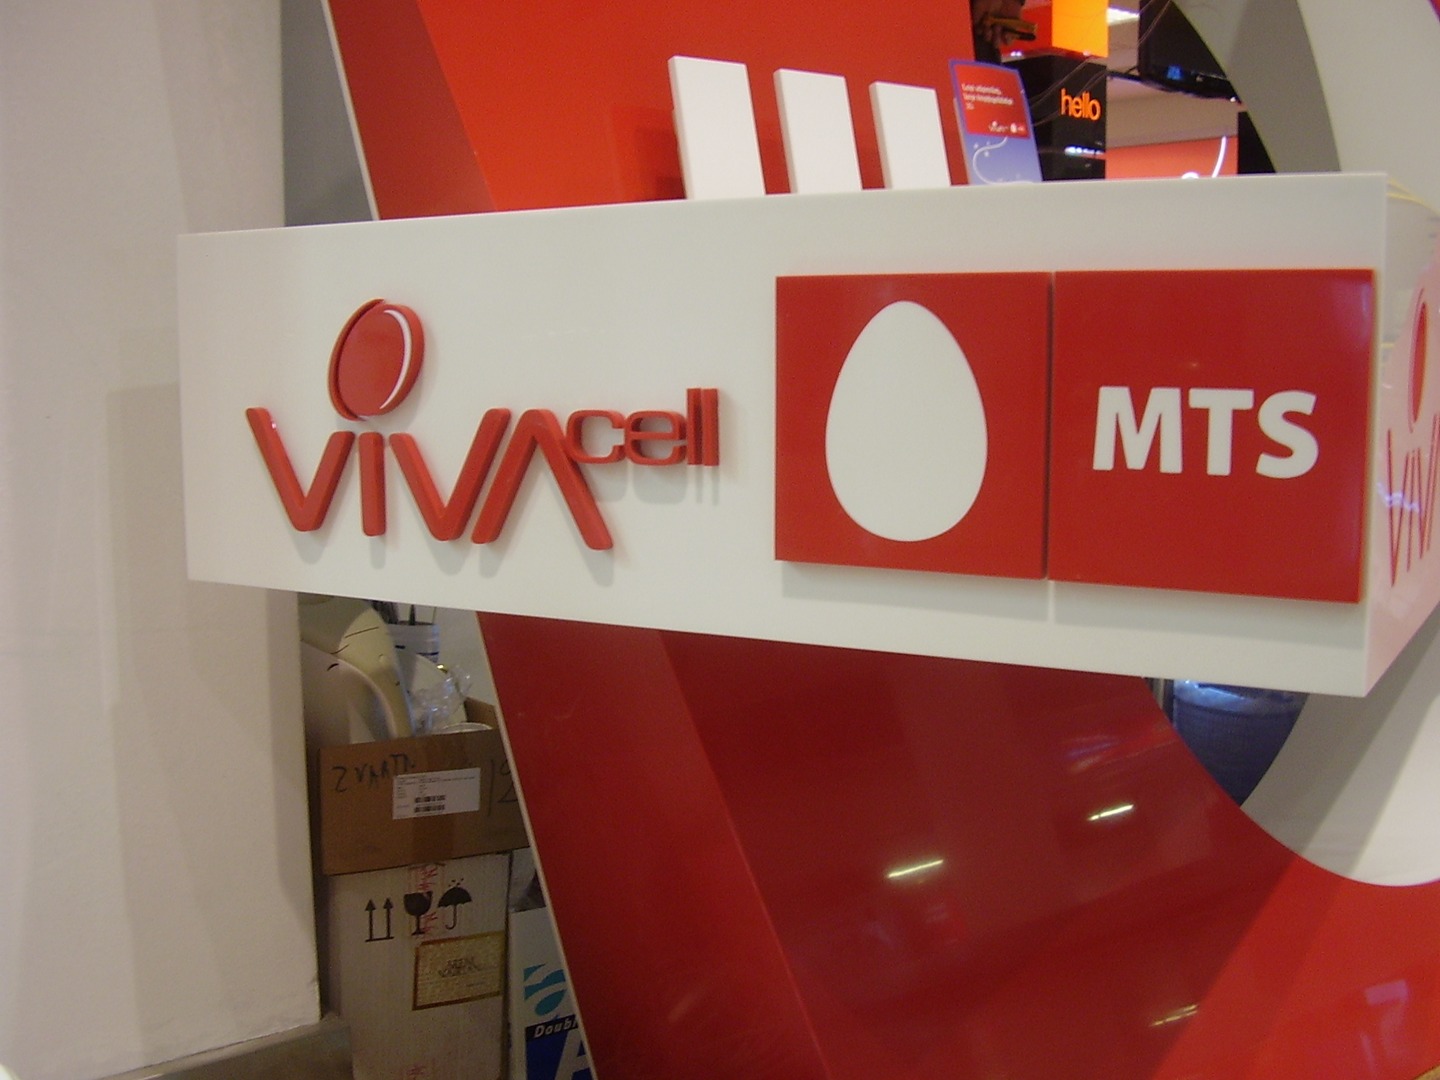 VivaCell-MTS: Additional doubled Internet package in 4G network for "Viva" subscribers